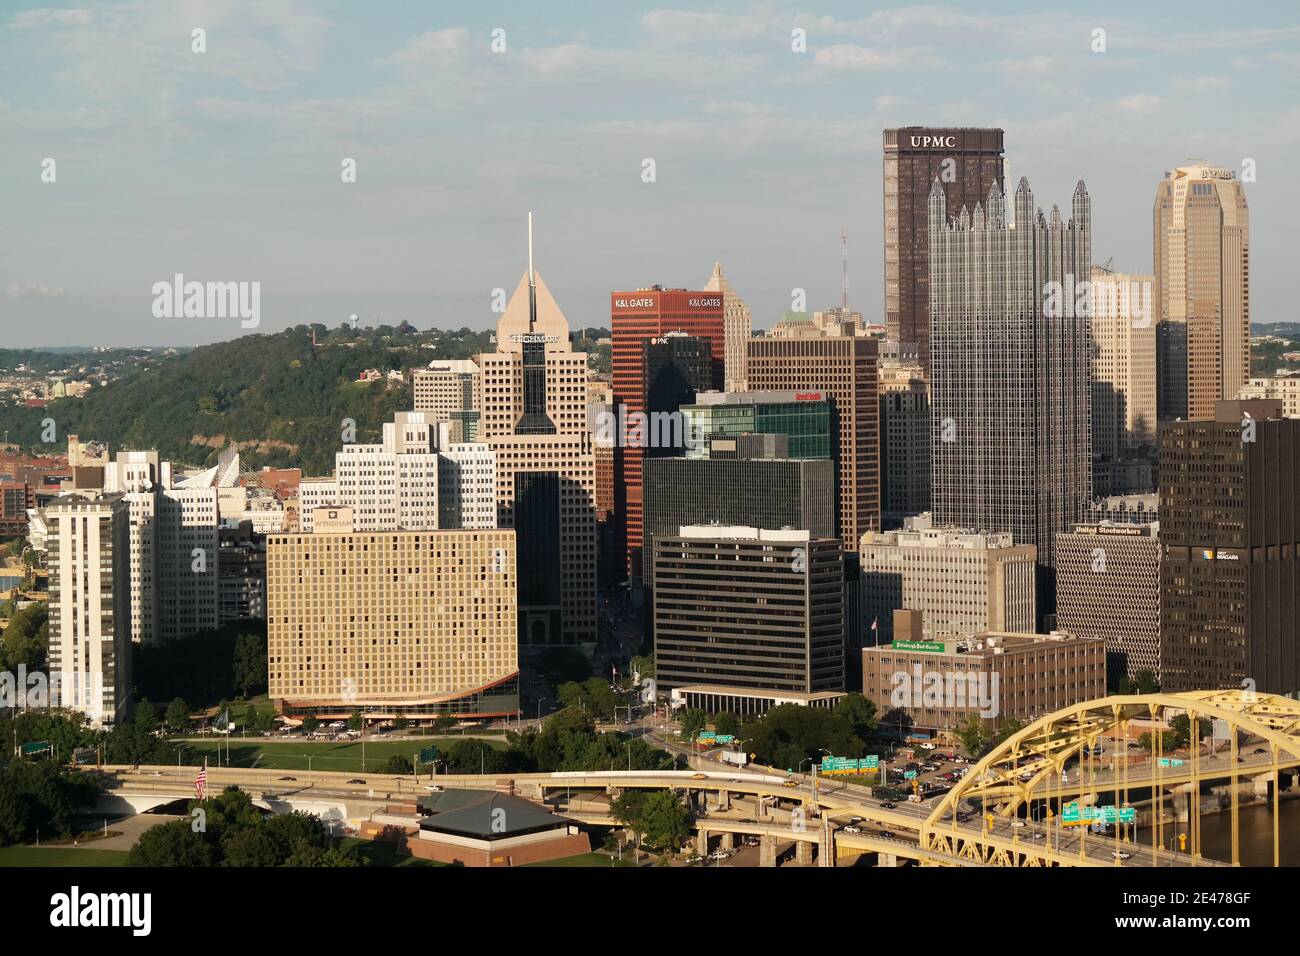 The downtown skyline of Pittsburgh, Pennsylvania, USA, with the Fort Pitt Bridge in the foreground. Stock Photo